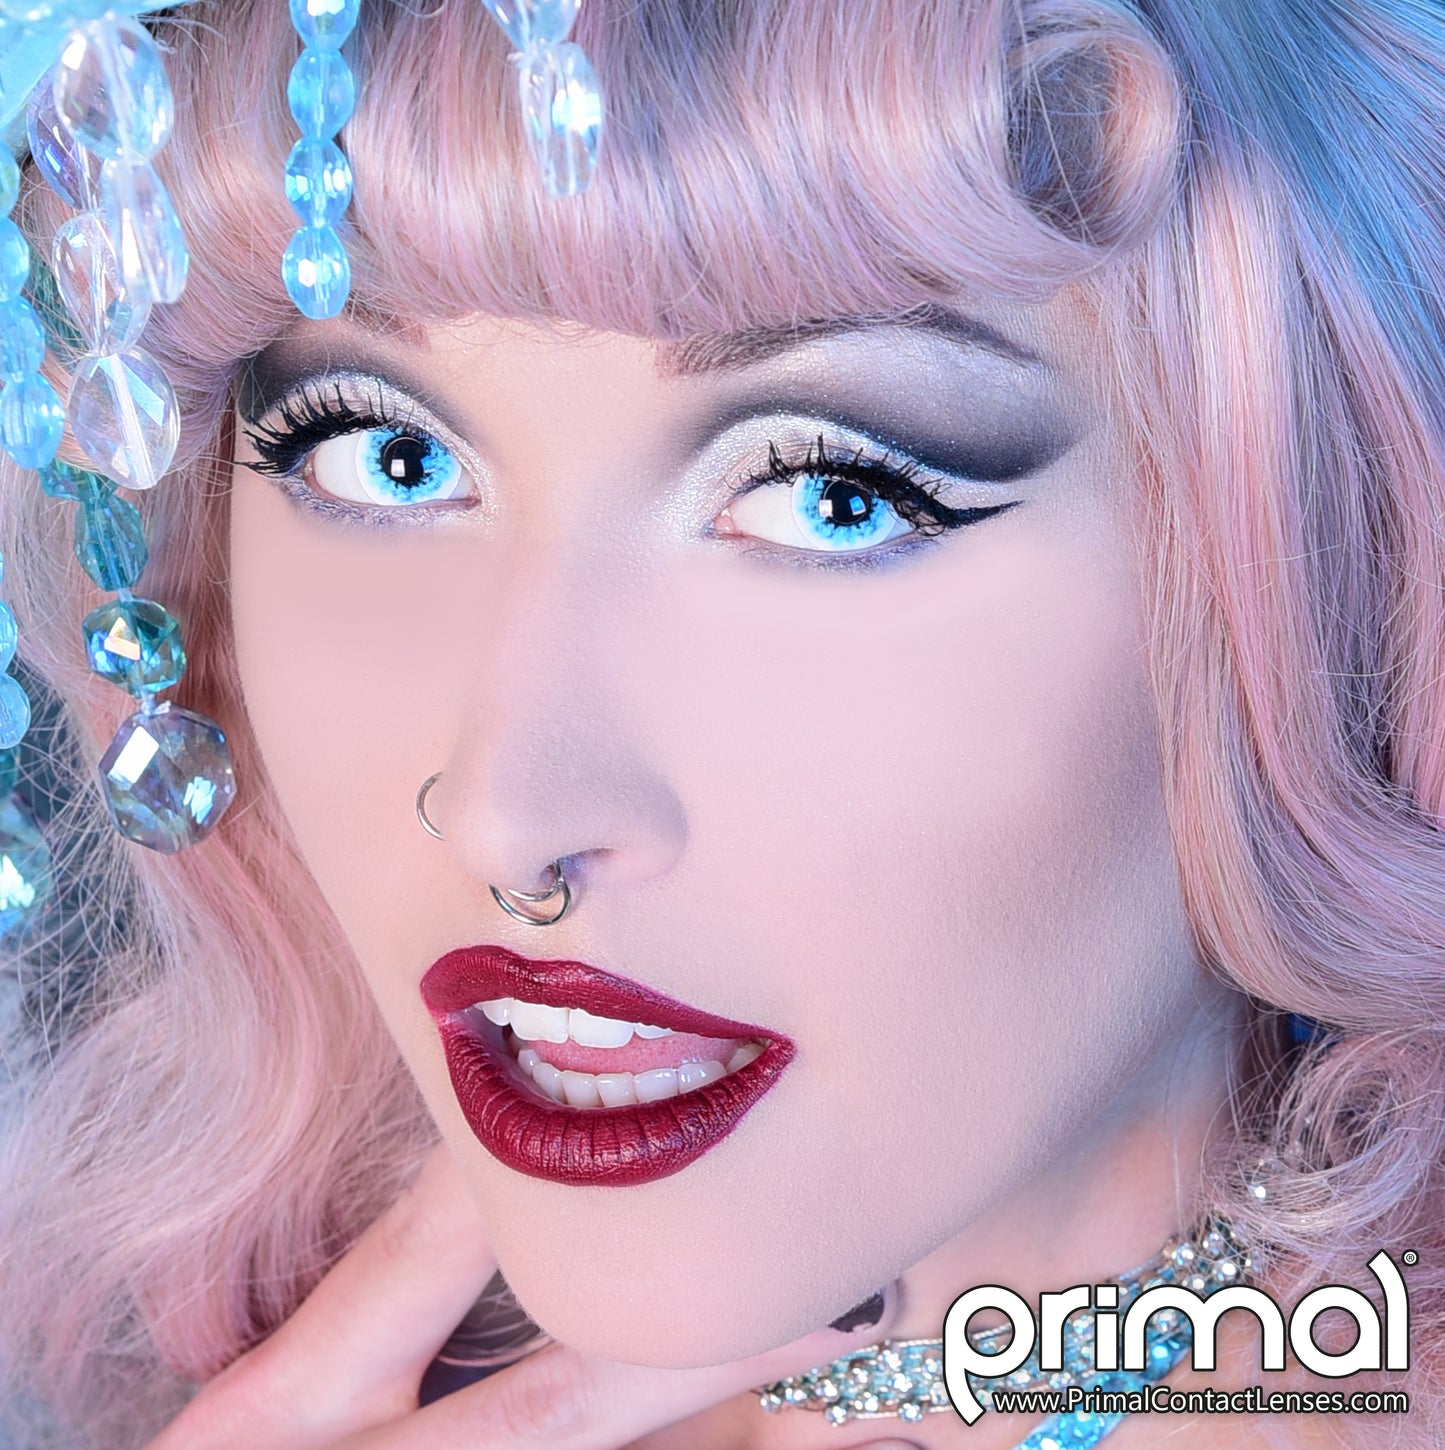 PRIMAL ® Wraith I - White & Blue Colored Contact Lenses